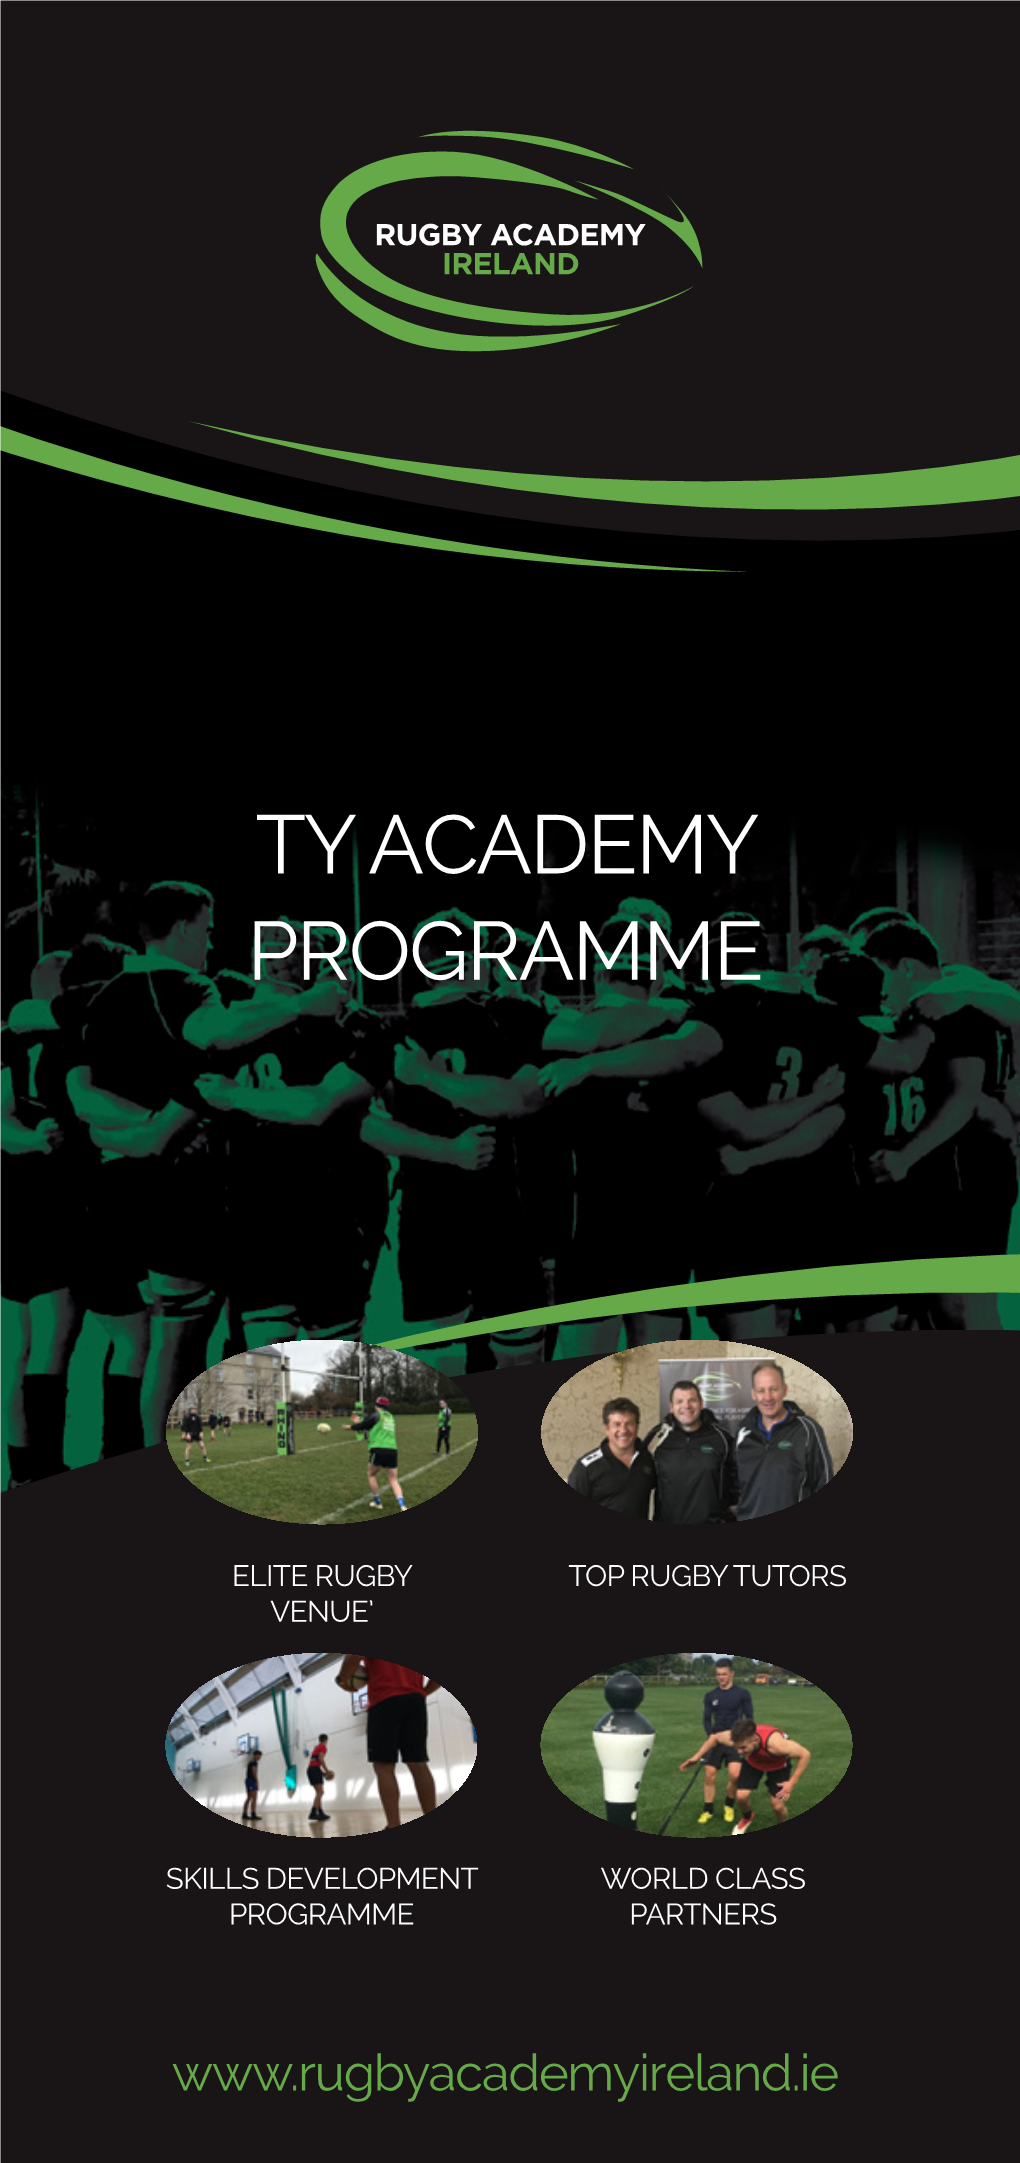 TY ACADEMY PROGRAMME DAY Residential Rugby Academy Based in County Kildare in the Province of Leinster, Ireland